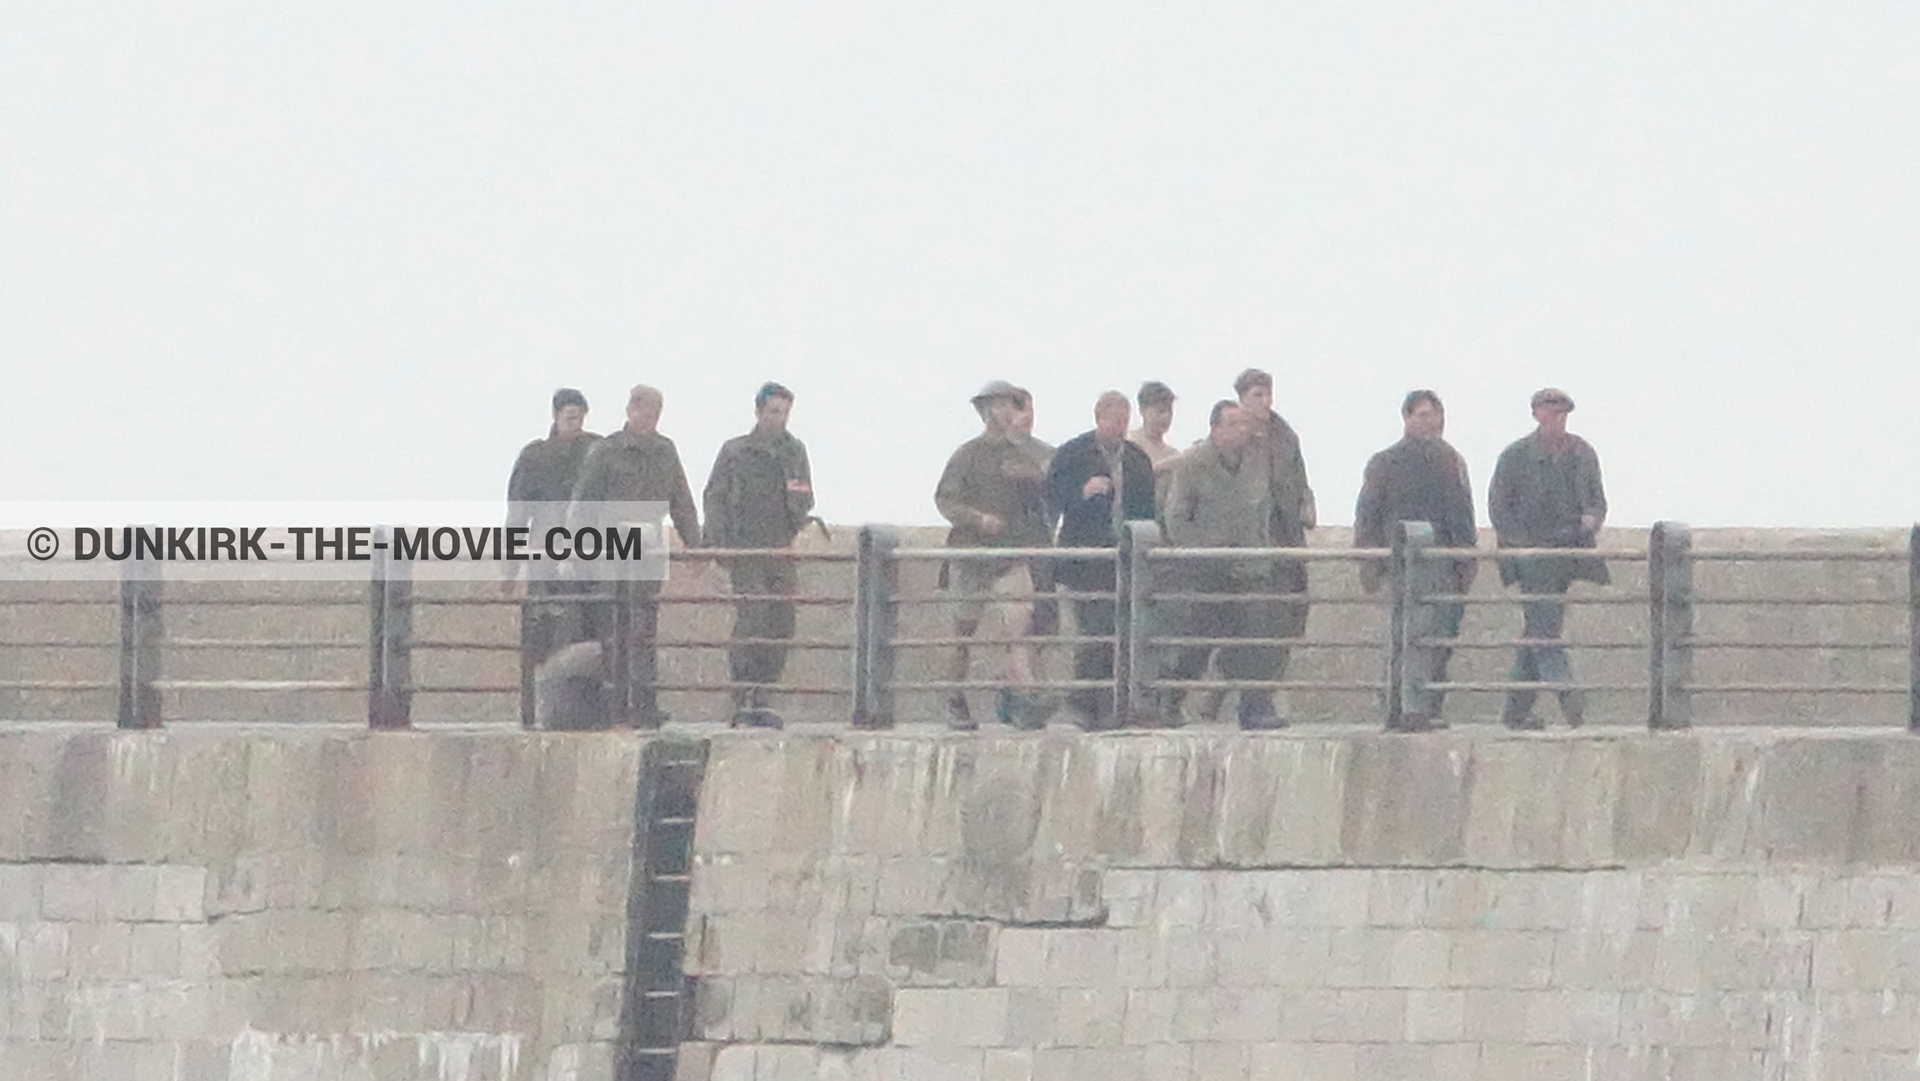 Picture with grey sky, supernumeraries, EST pier,  from behind the scene of the Dunkirk movie by Nolan